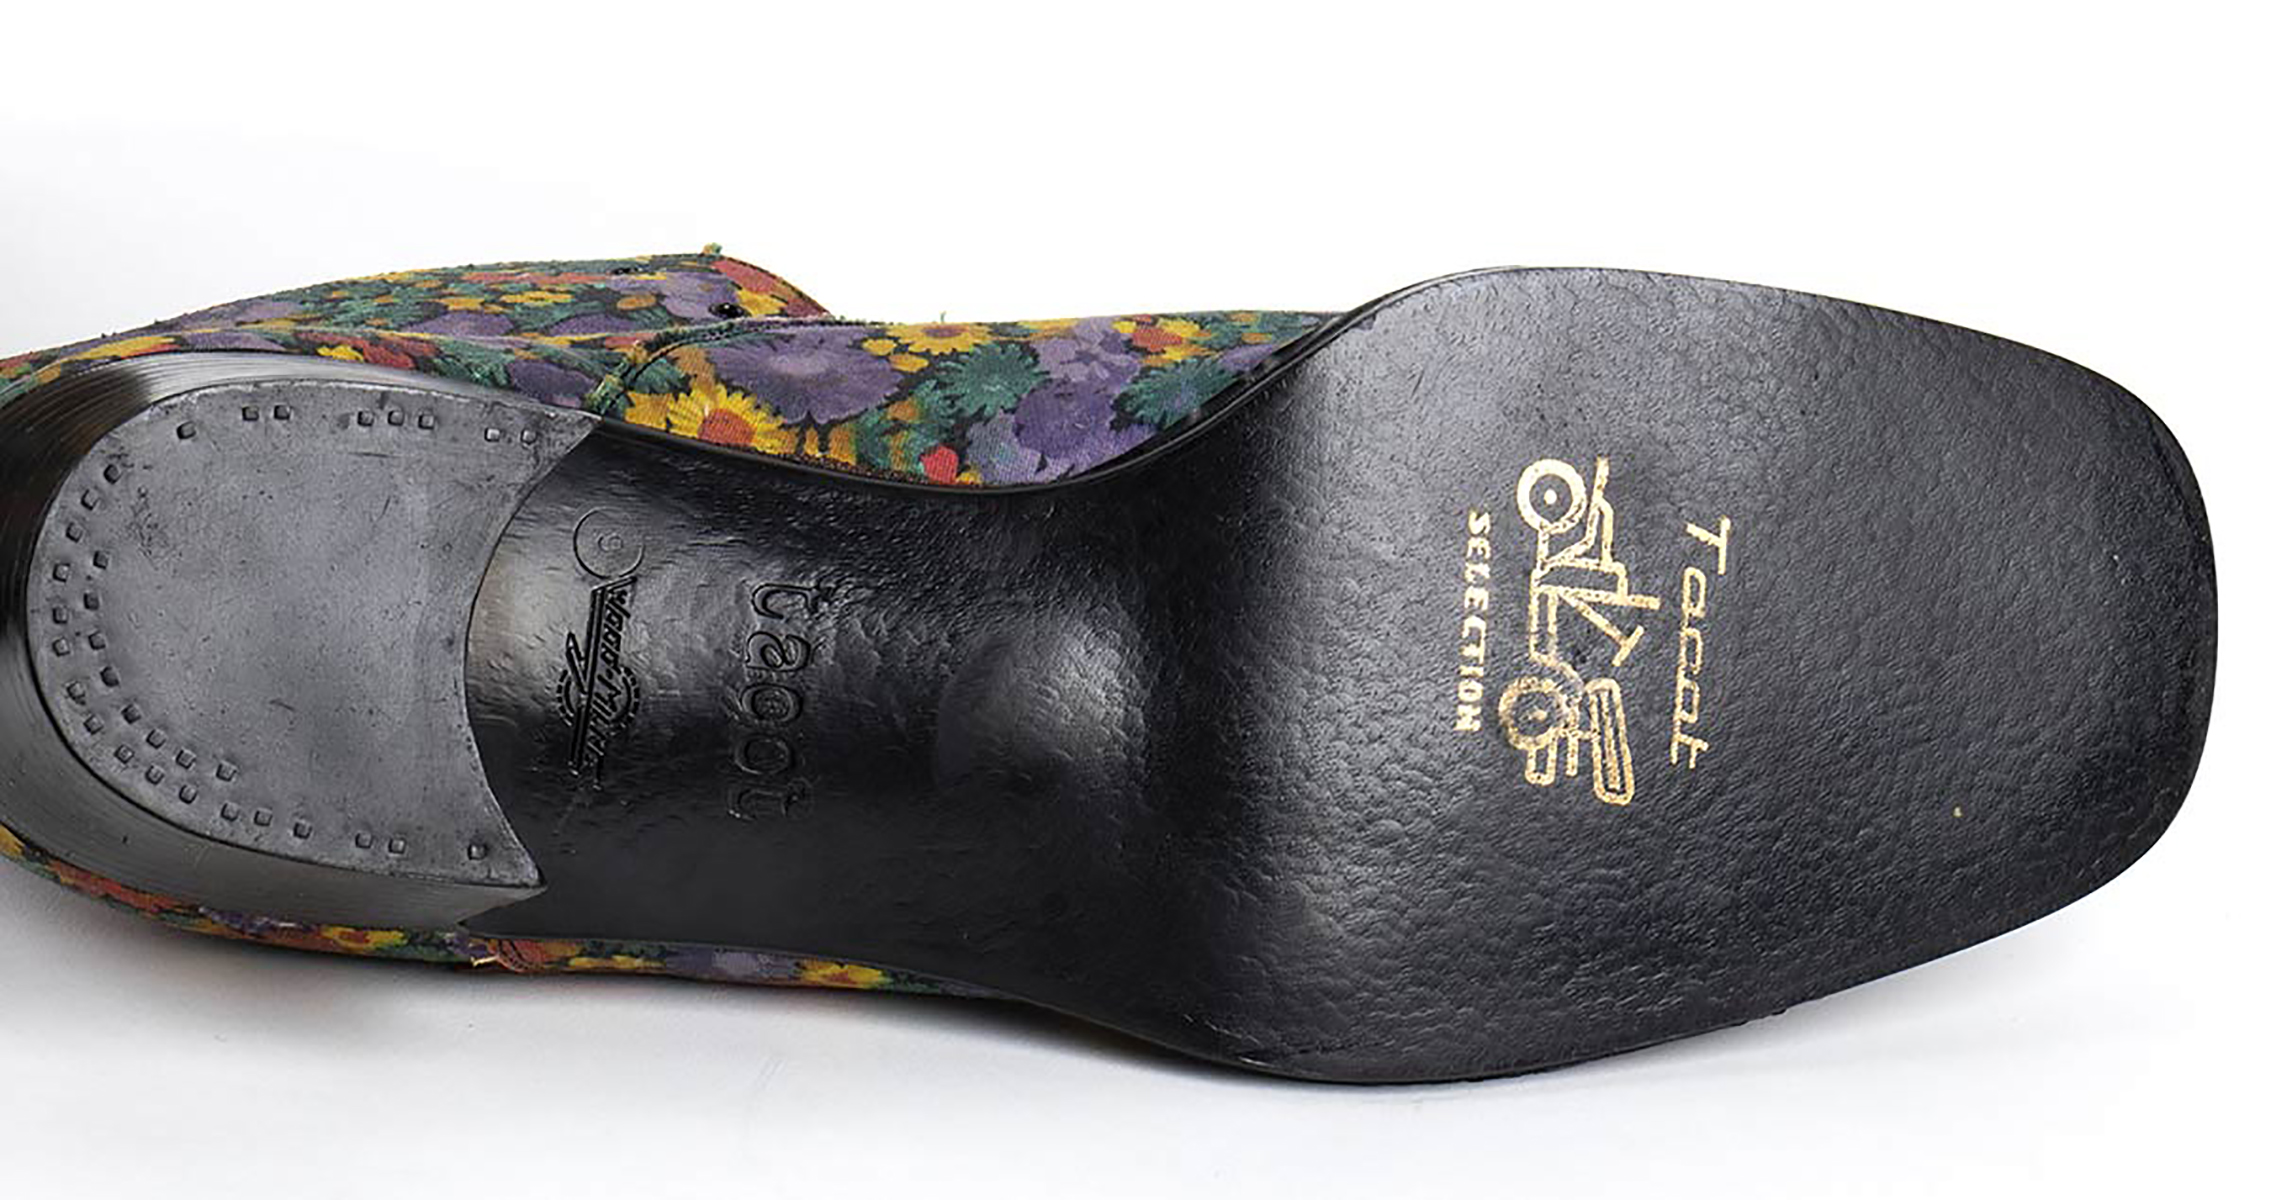 MAN LEATHER SHOES 70s Man leather shoes floral pattern Grado di condizione generale B - Image 3 of 3